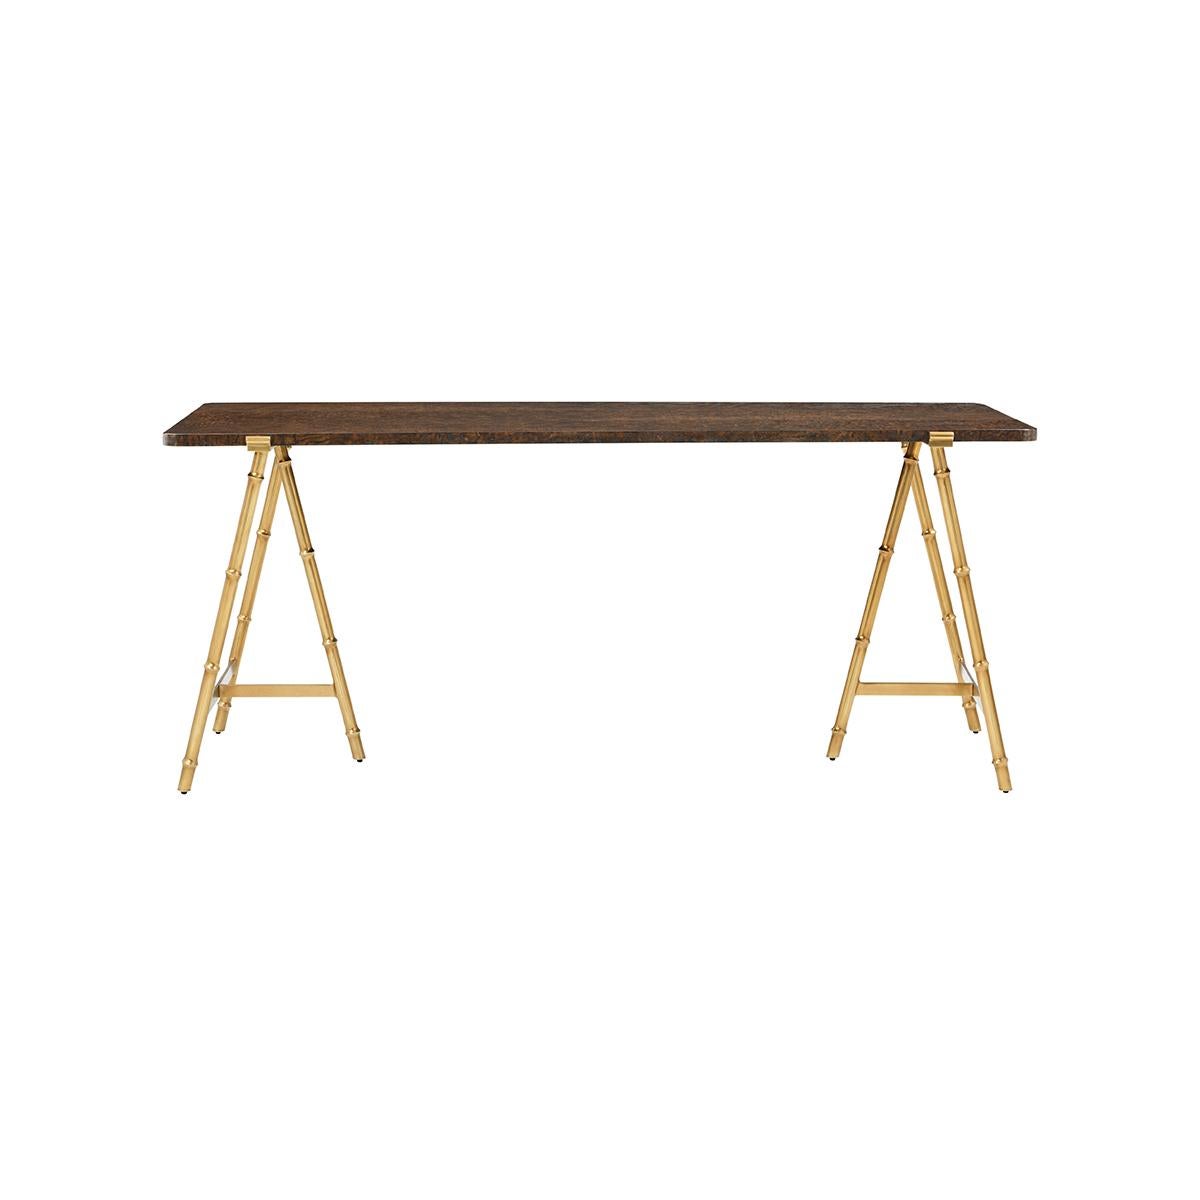 Slender lines form a light and airy design in this modern table. A graceful combination of burl wood in a warm brown polished finish atop an organic faux bois base in a satin bronze finish.

Dimensions: 72